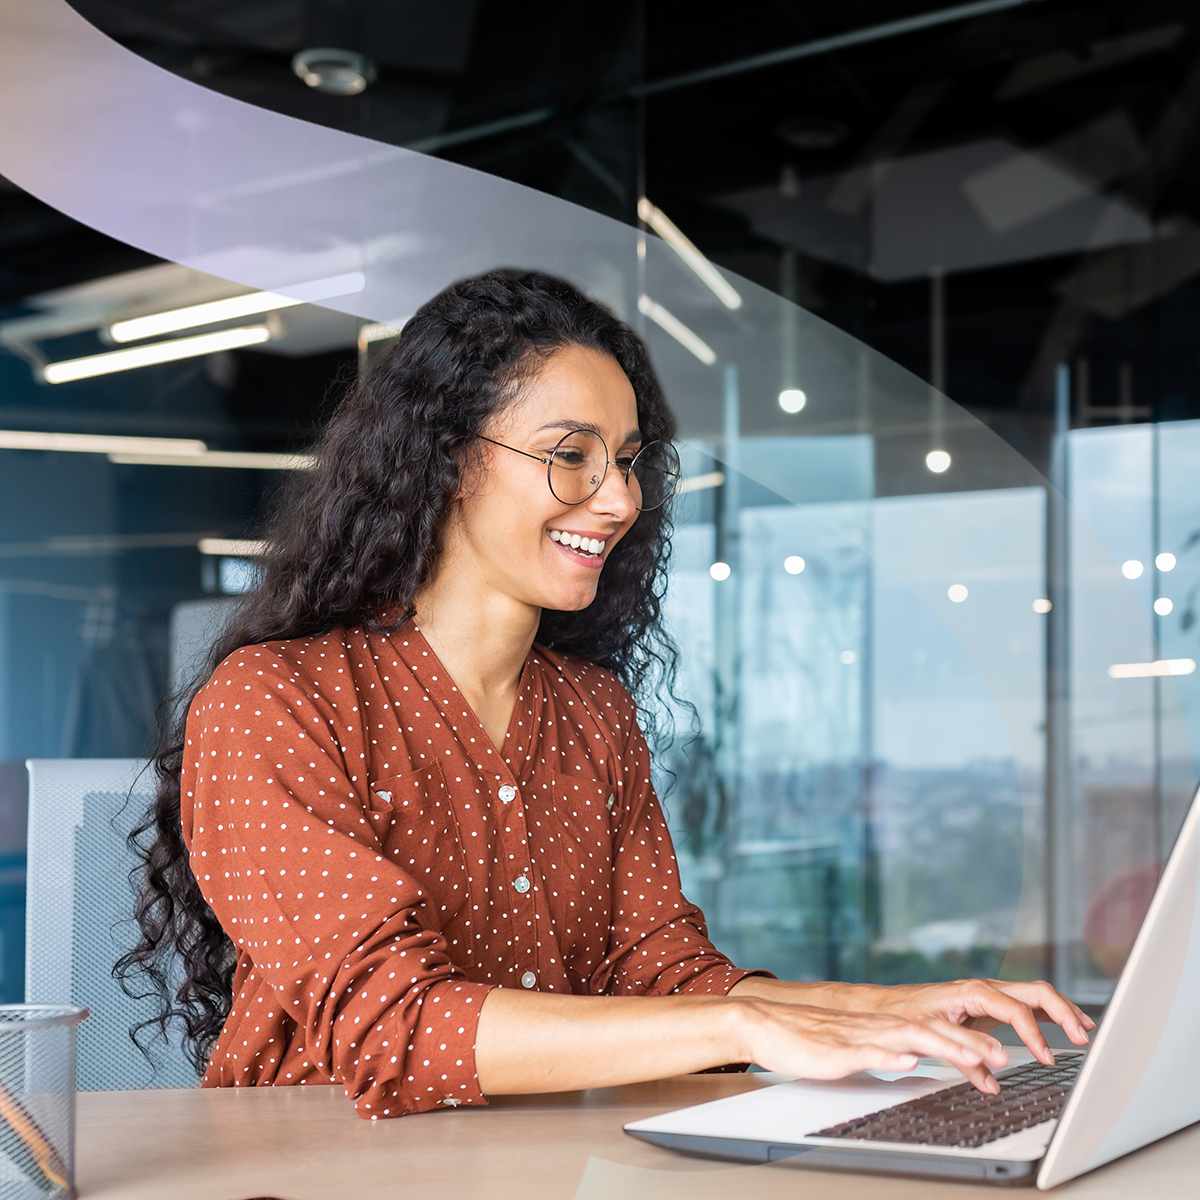 Woman working in office setting sitting at her laptop smiling.